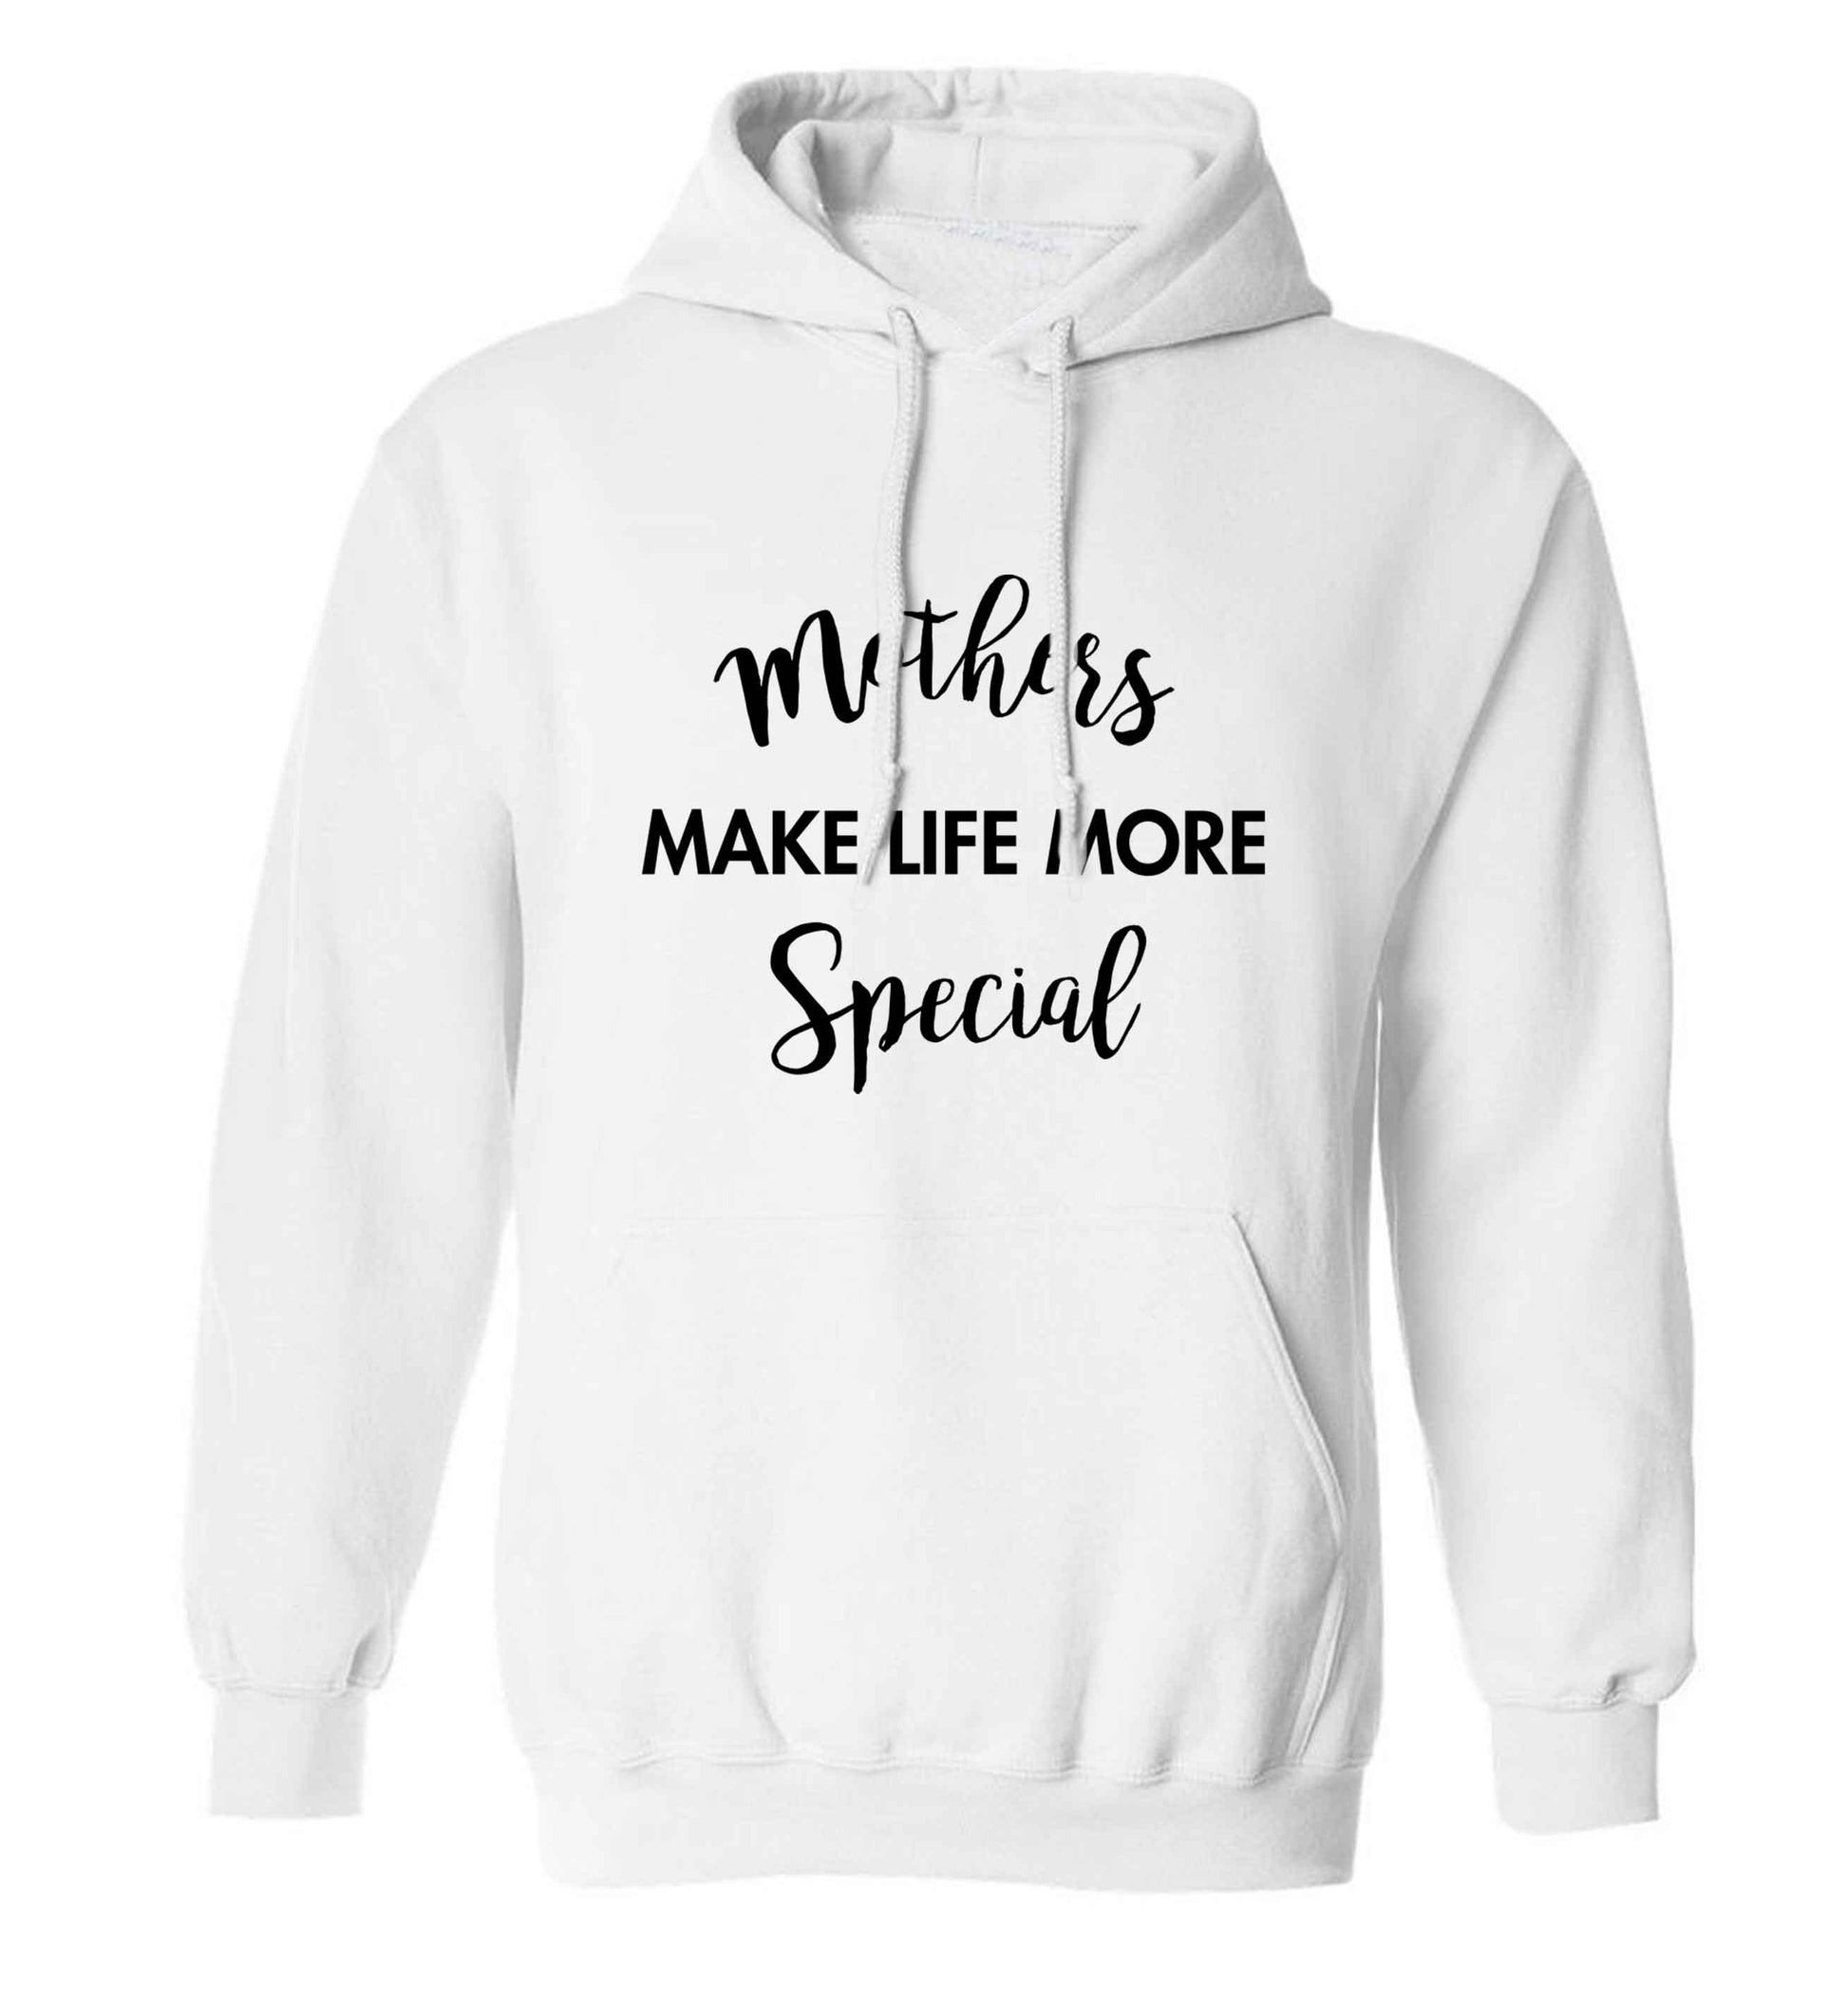 Mother's make life more special adults unisex white hoodie 2XL